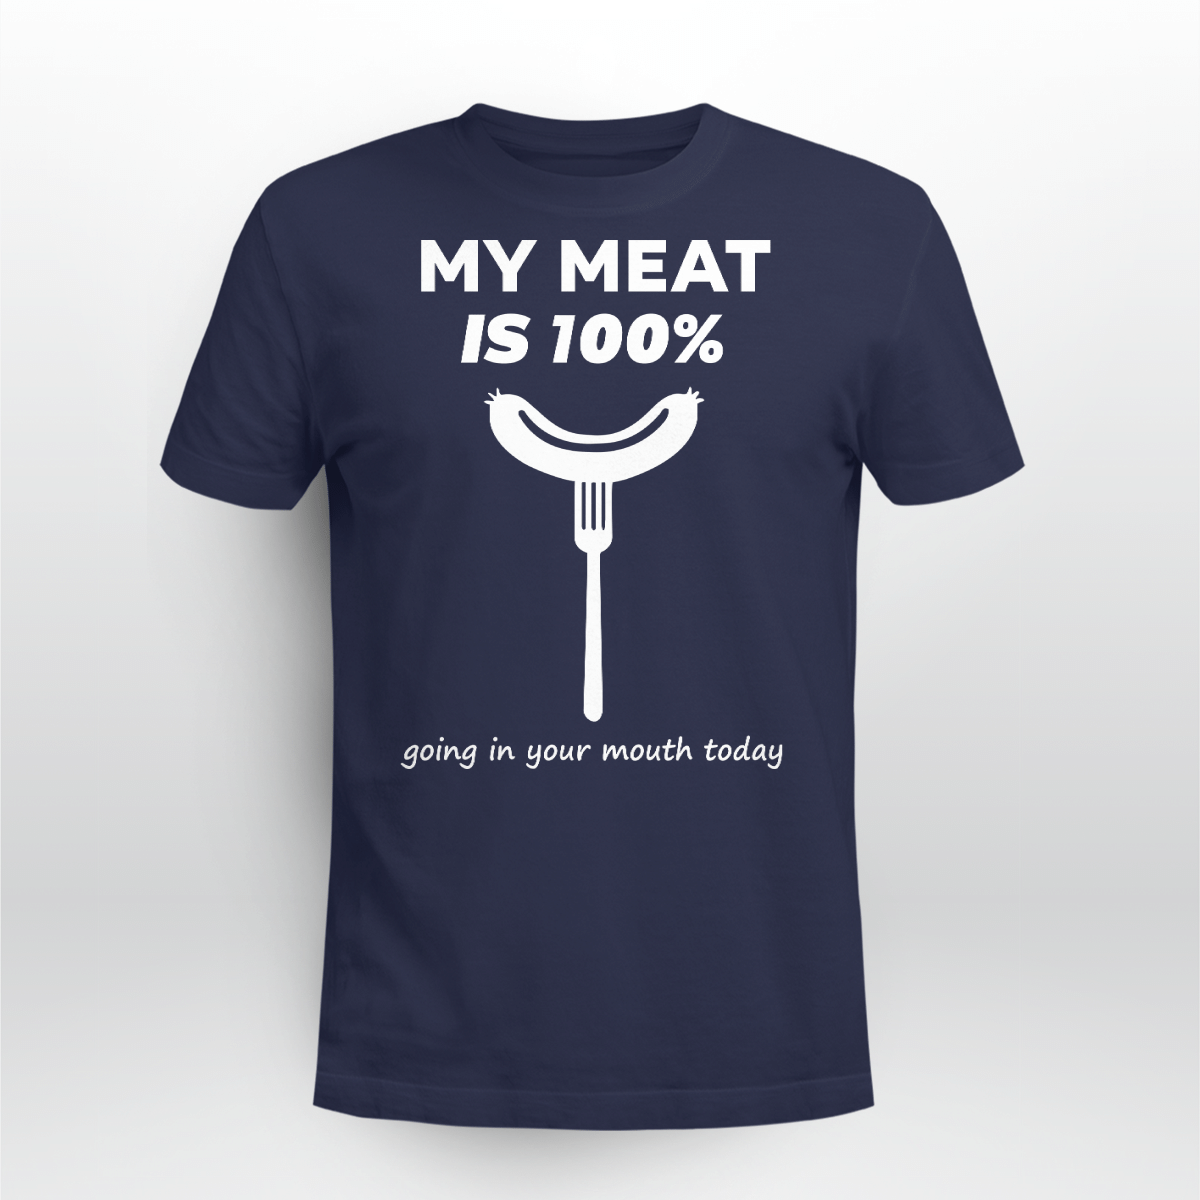 My Meat Is 100% Going In Your Mouth Today BBQ Shirt Style: Unisex T-shirt, Color: Navy